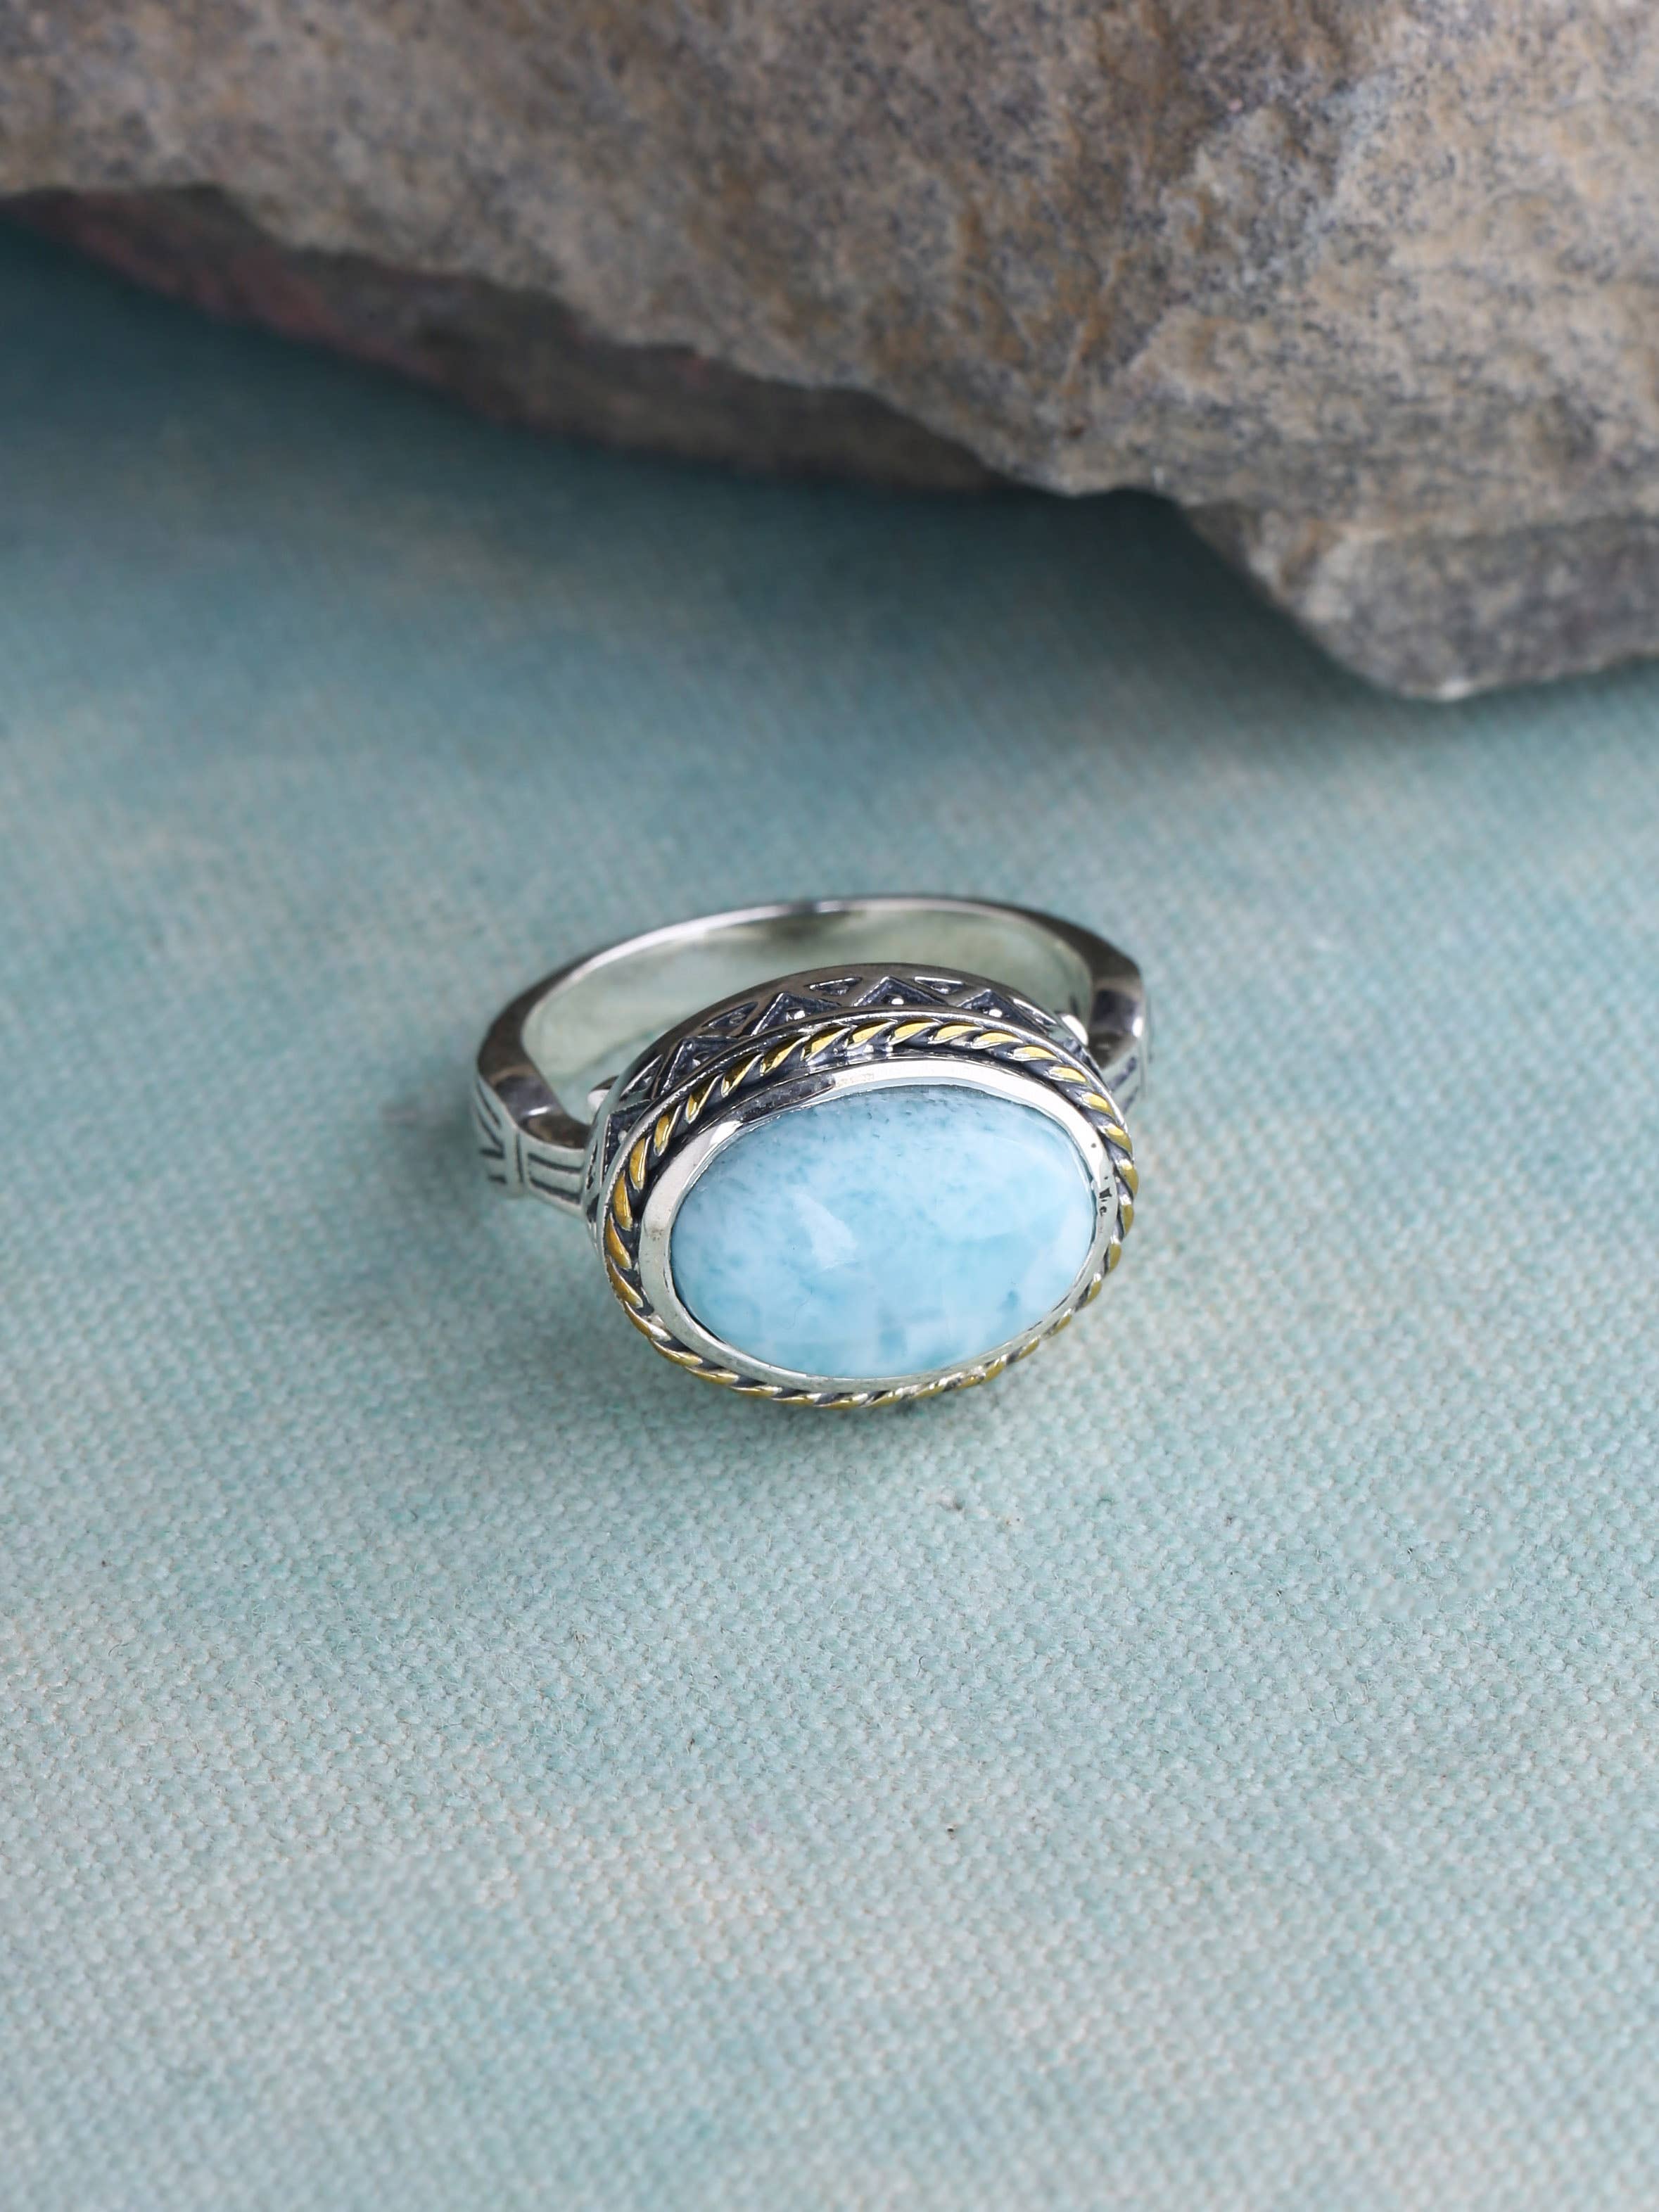 WHOLESALE 11PC 925 SOLID STERLING SILVER BLUE LARIMAR RING LOT Q001 